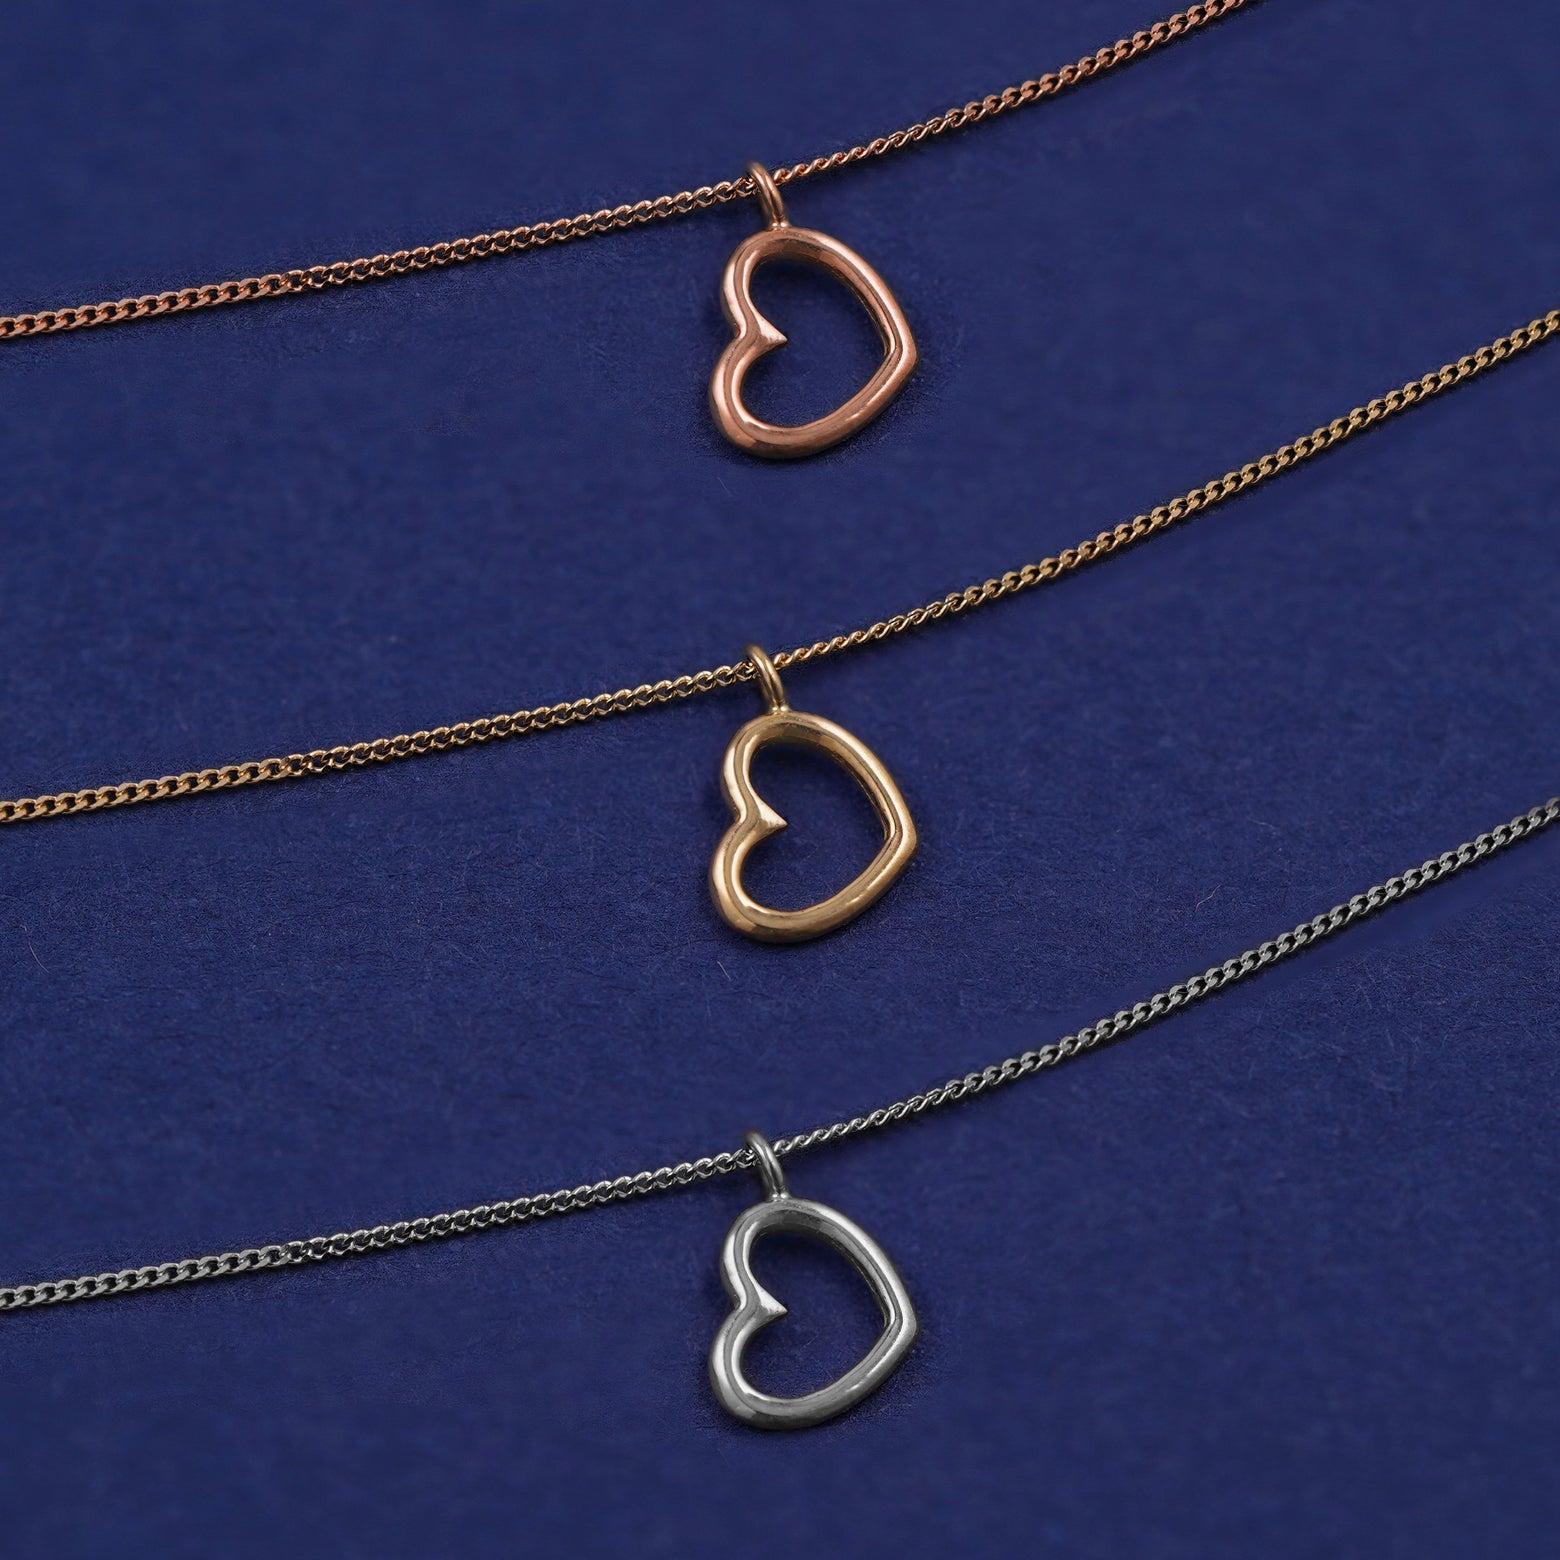 Three Heart Necklaces shown in options of rose, yellow, and white gold